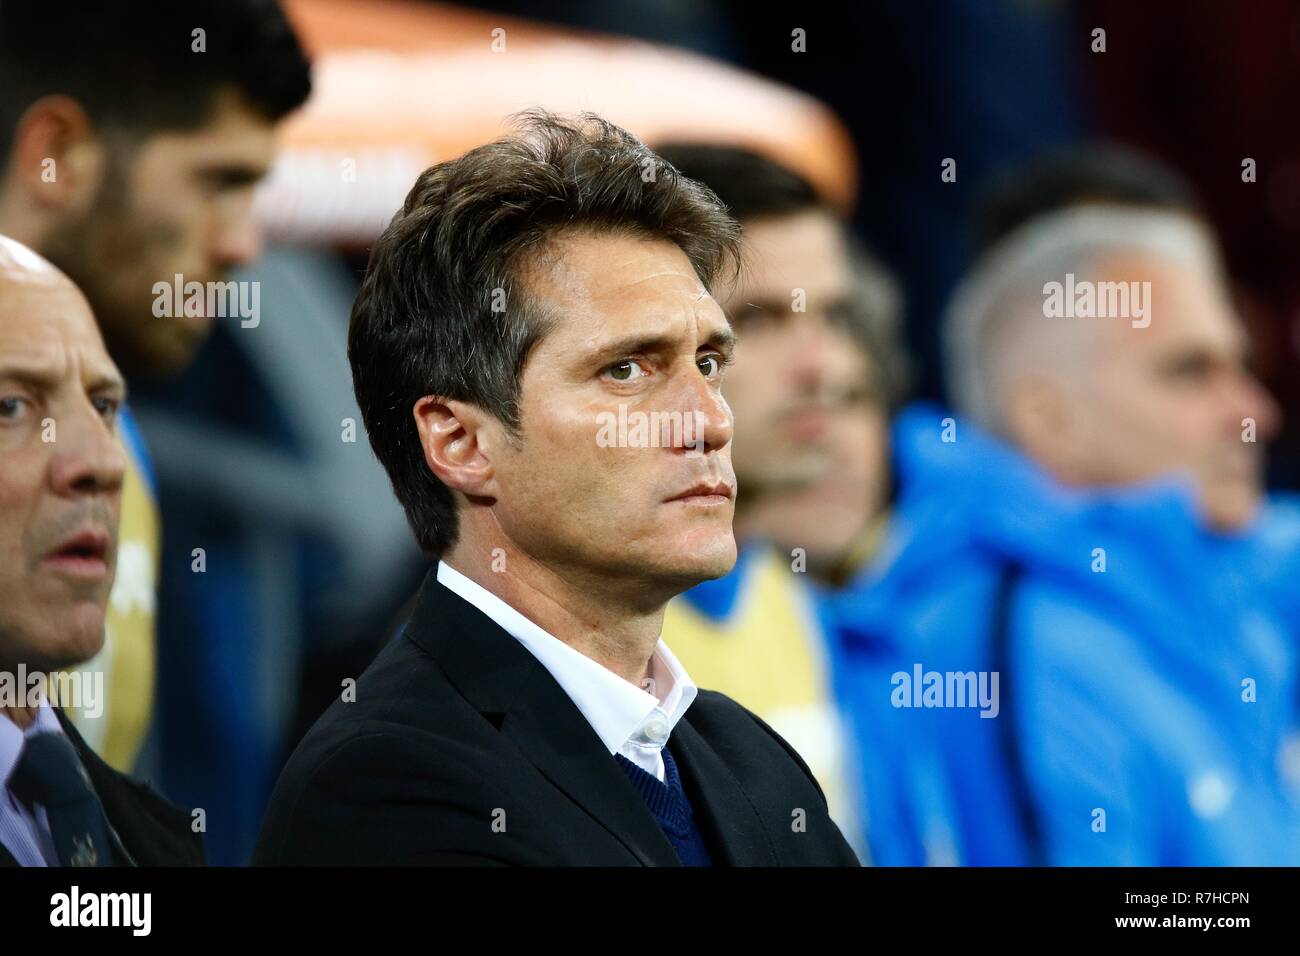 Boca Juniors Coach High Resolution Stock Photography and Images - Alamy